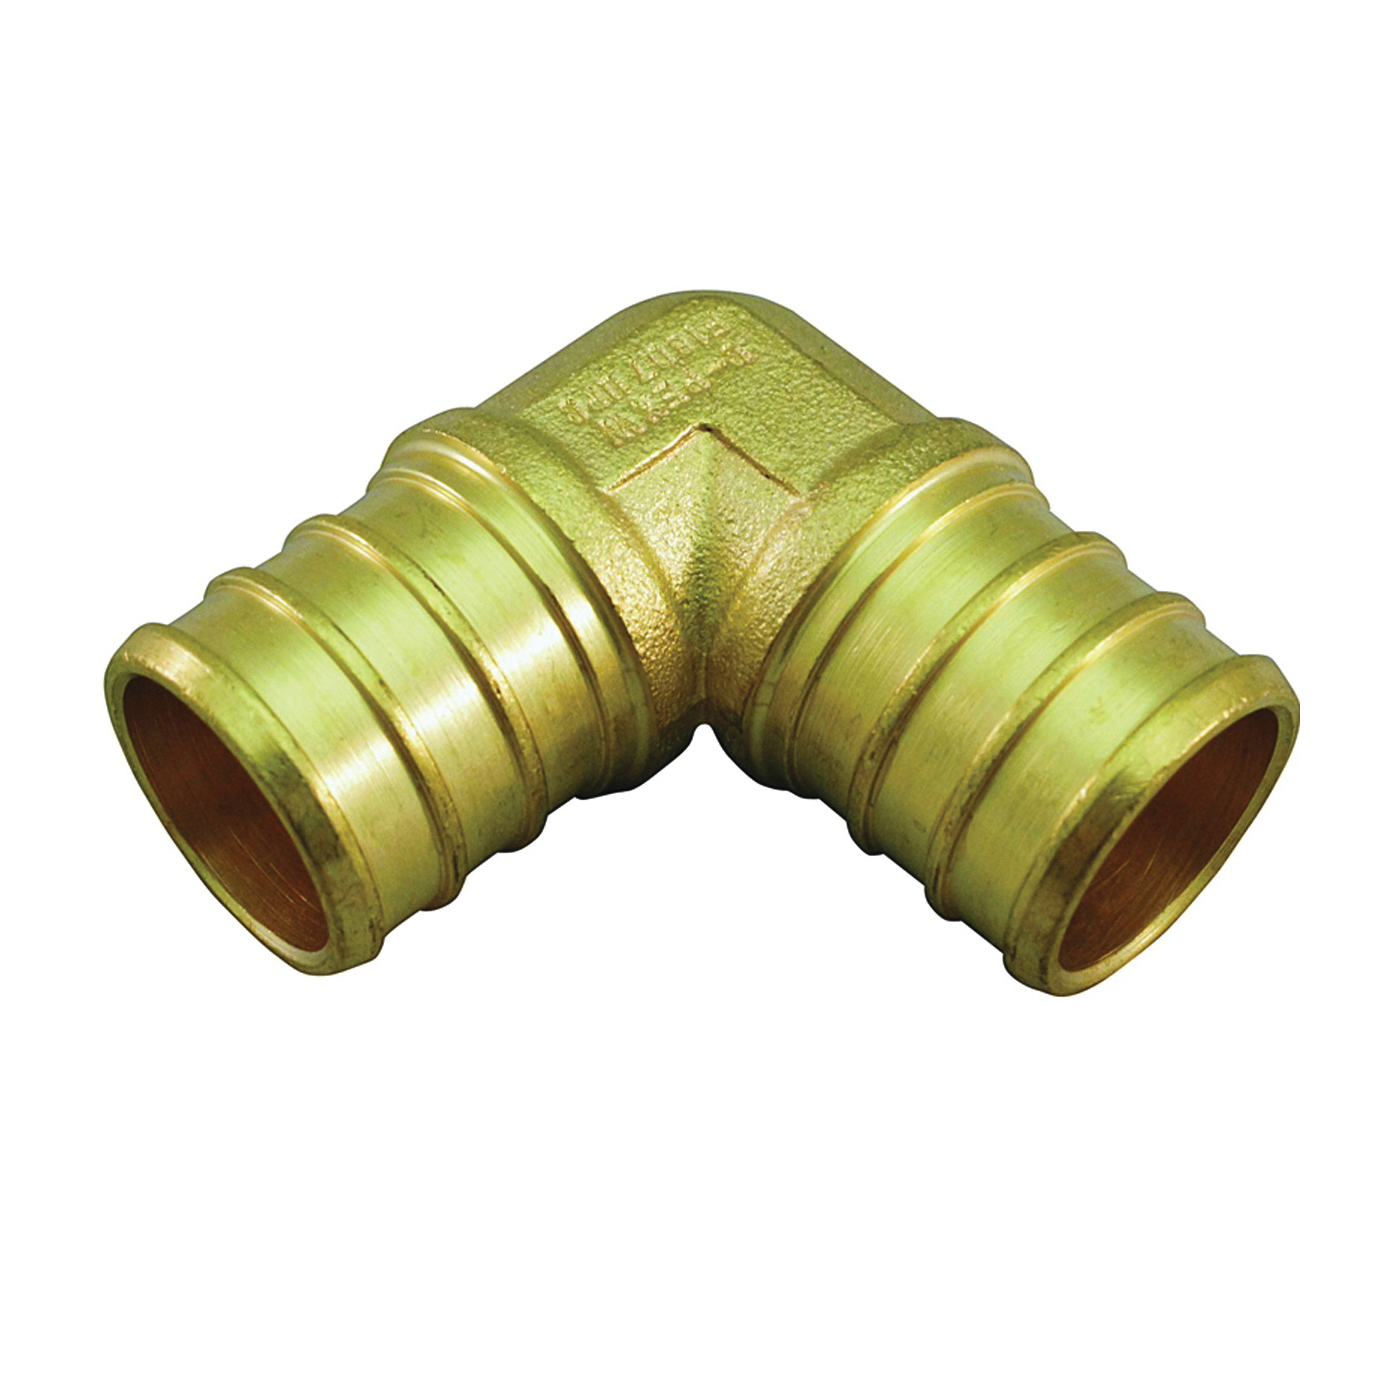 APXE3434 Pipe Elbow, 3/4 in, Barb, Brass, 200 psi Pressure